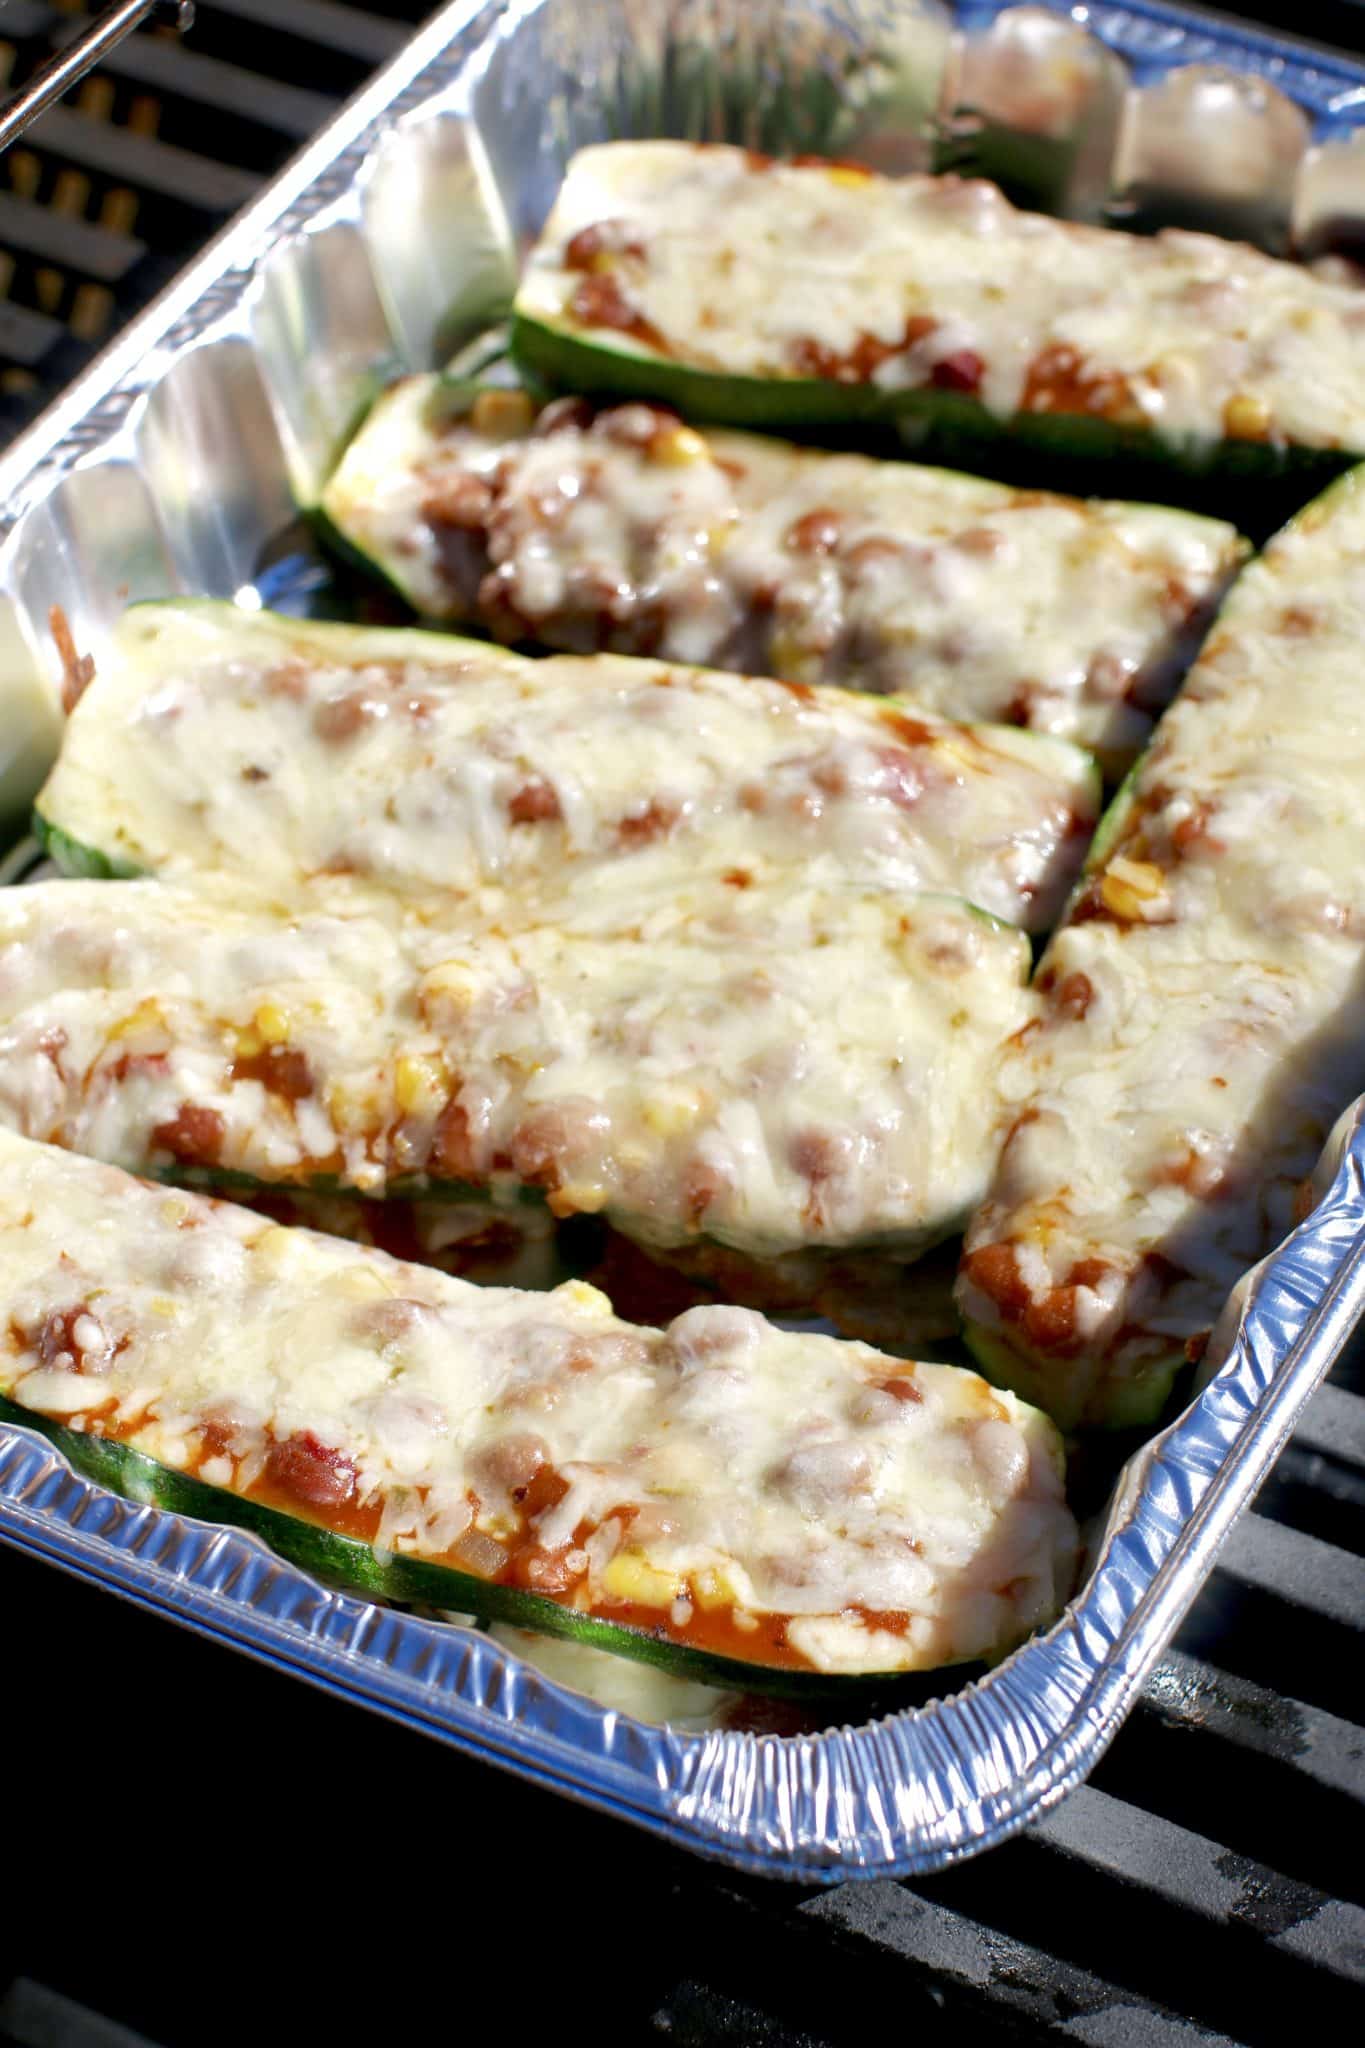 fully cooked stuffed zucchini in baking pan on the grill.